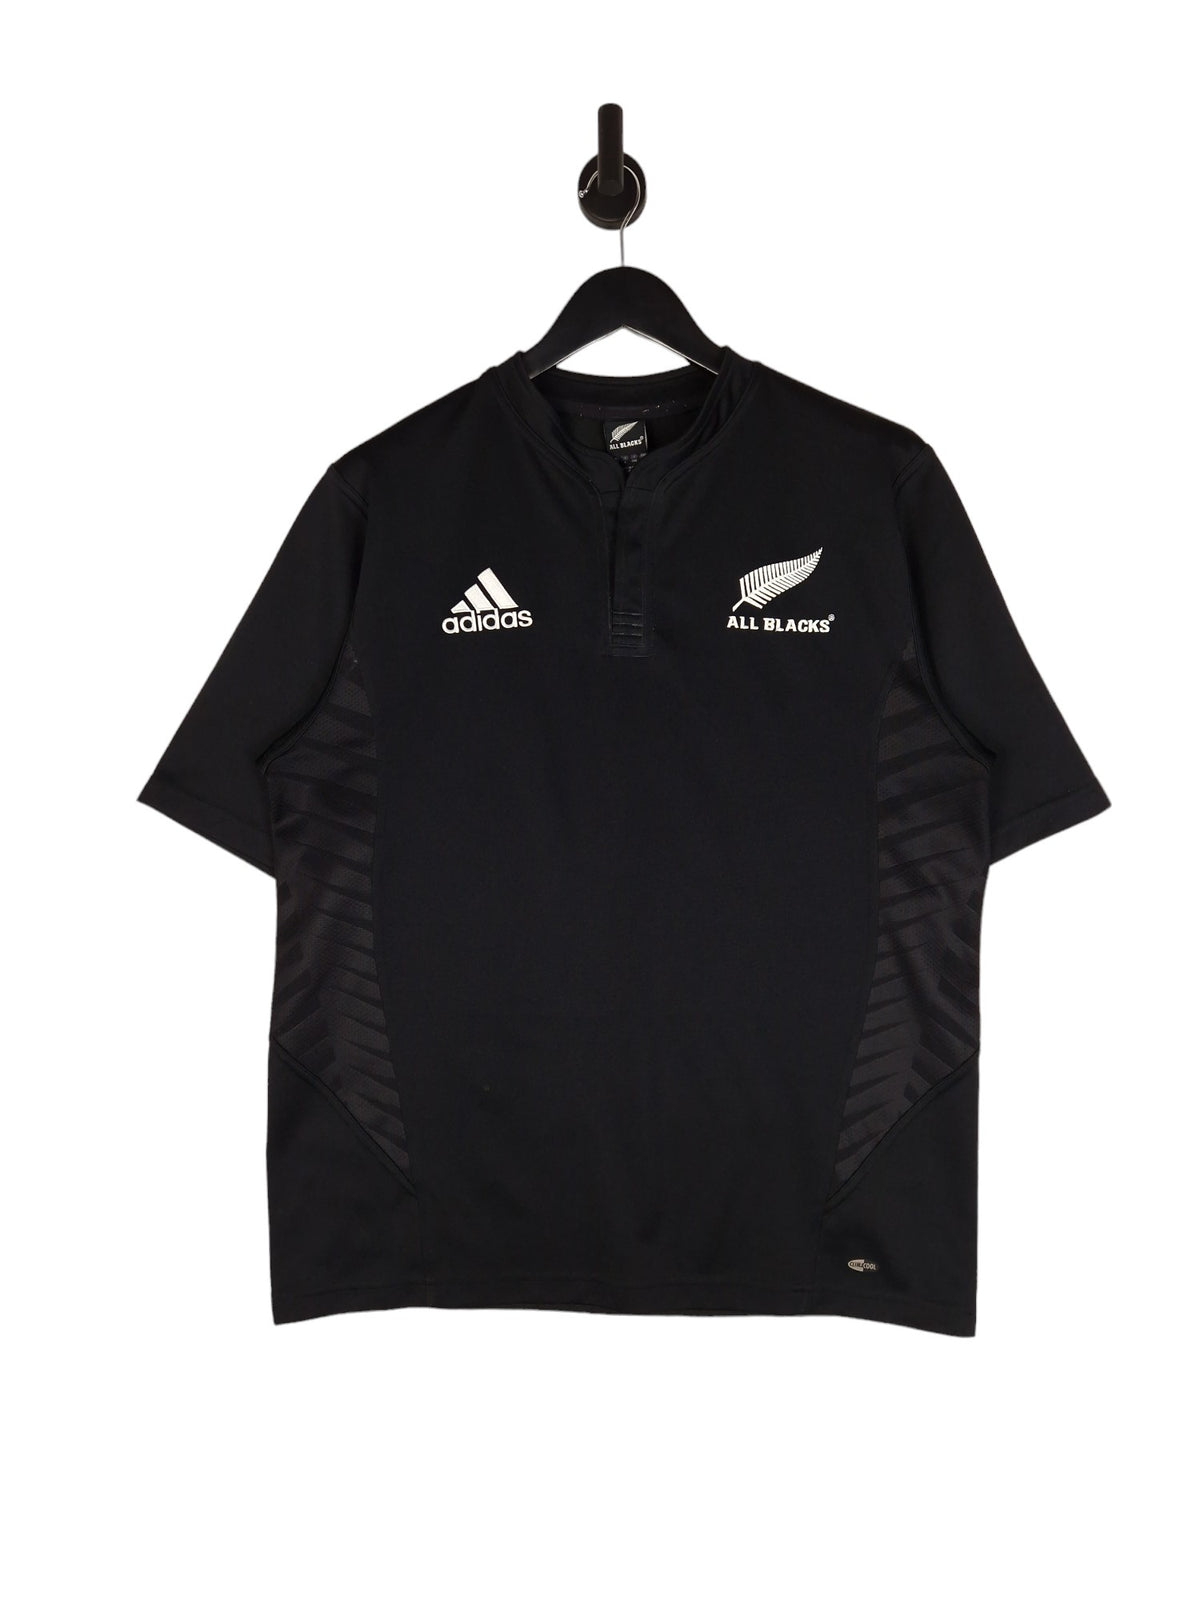 Adidas 2007/08 New Zealand All Blacks Rugby Jersey - Size Large